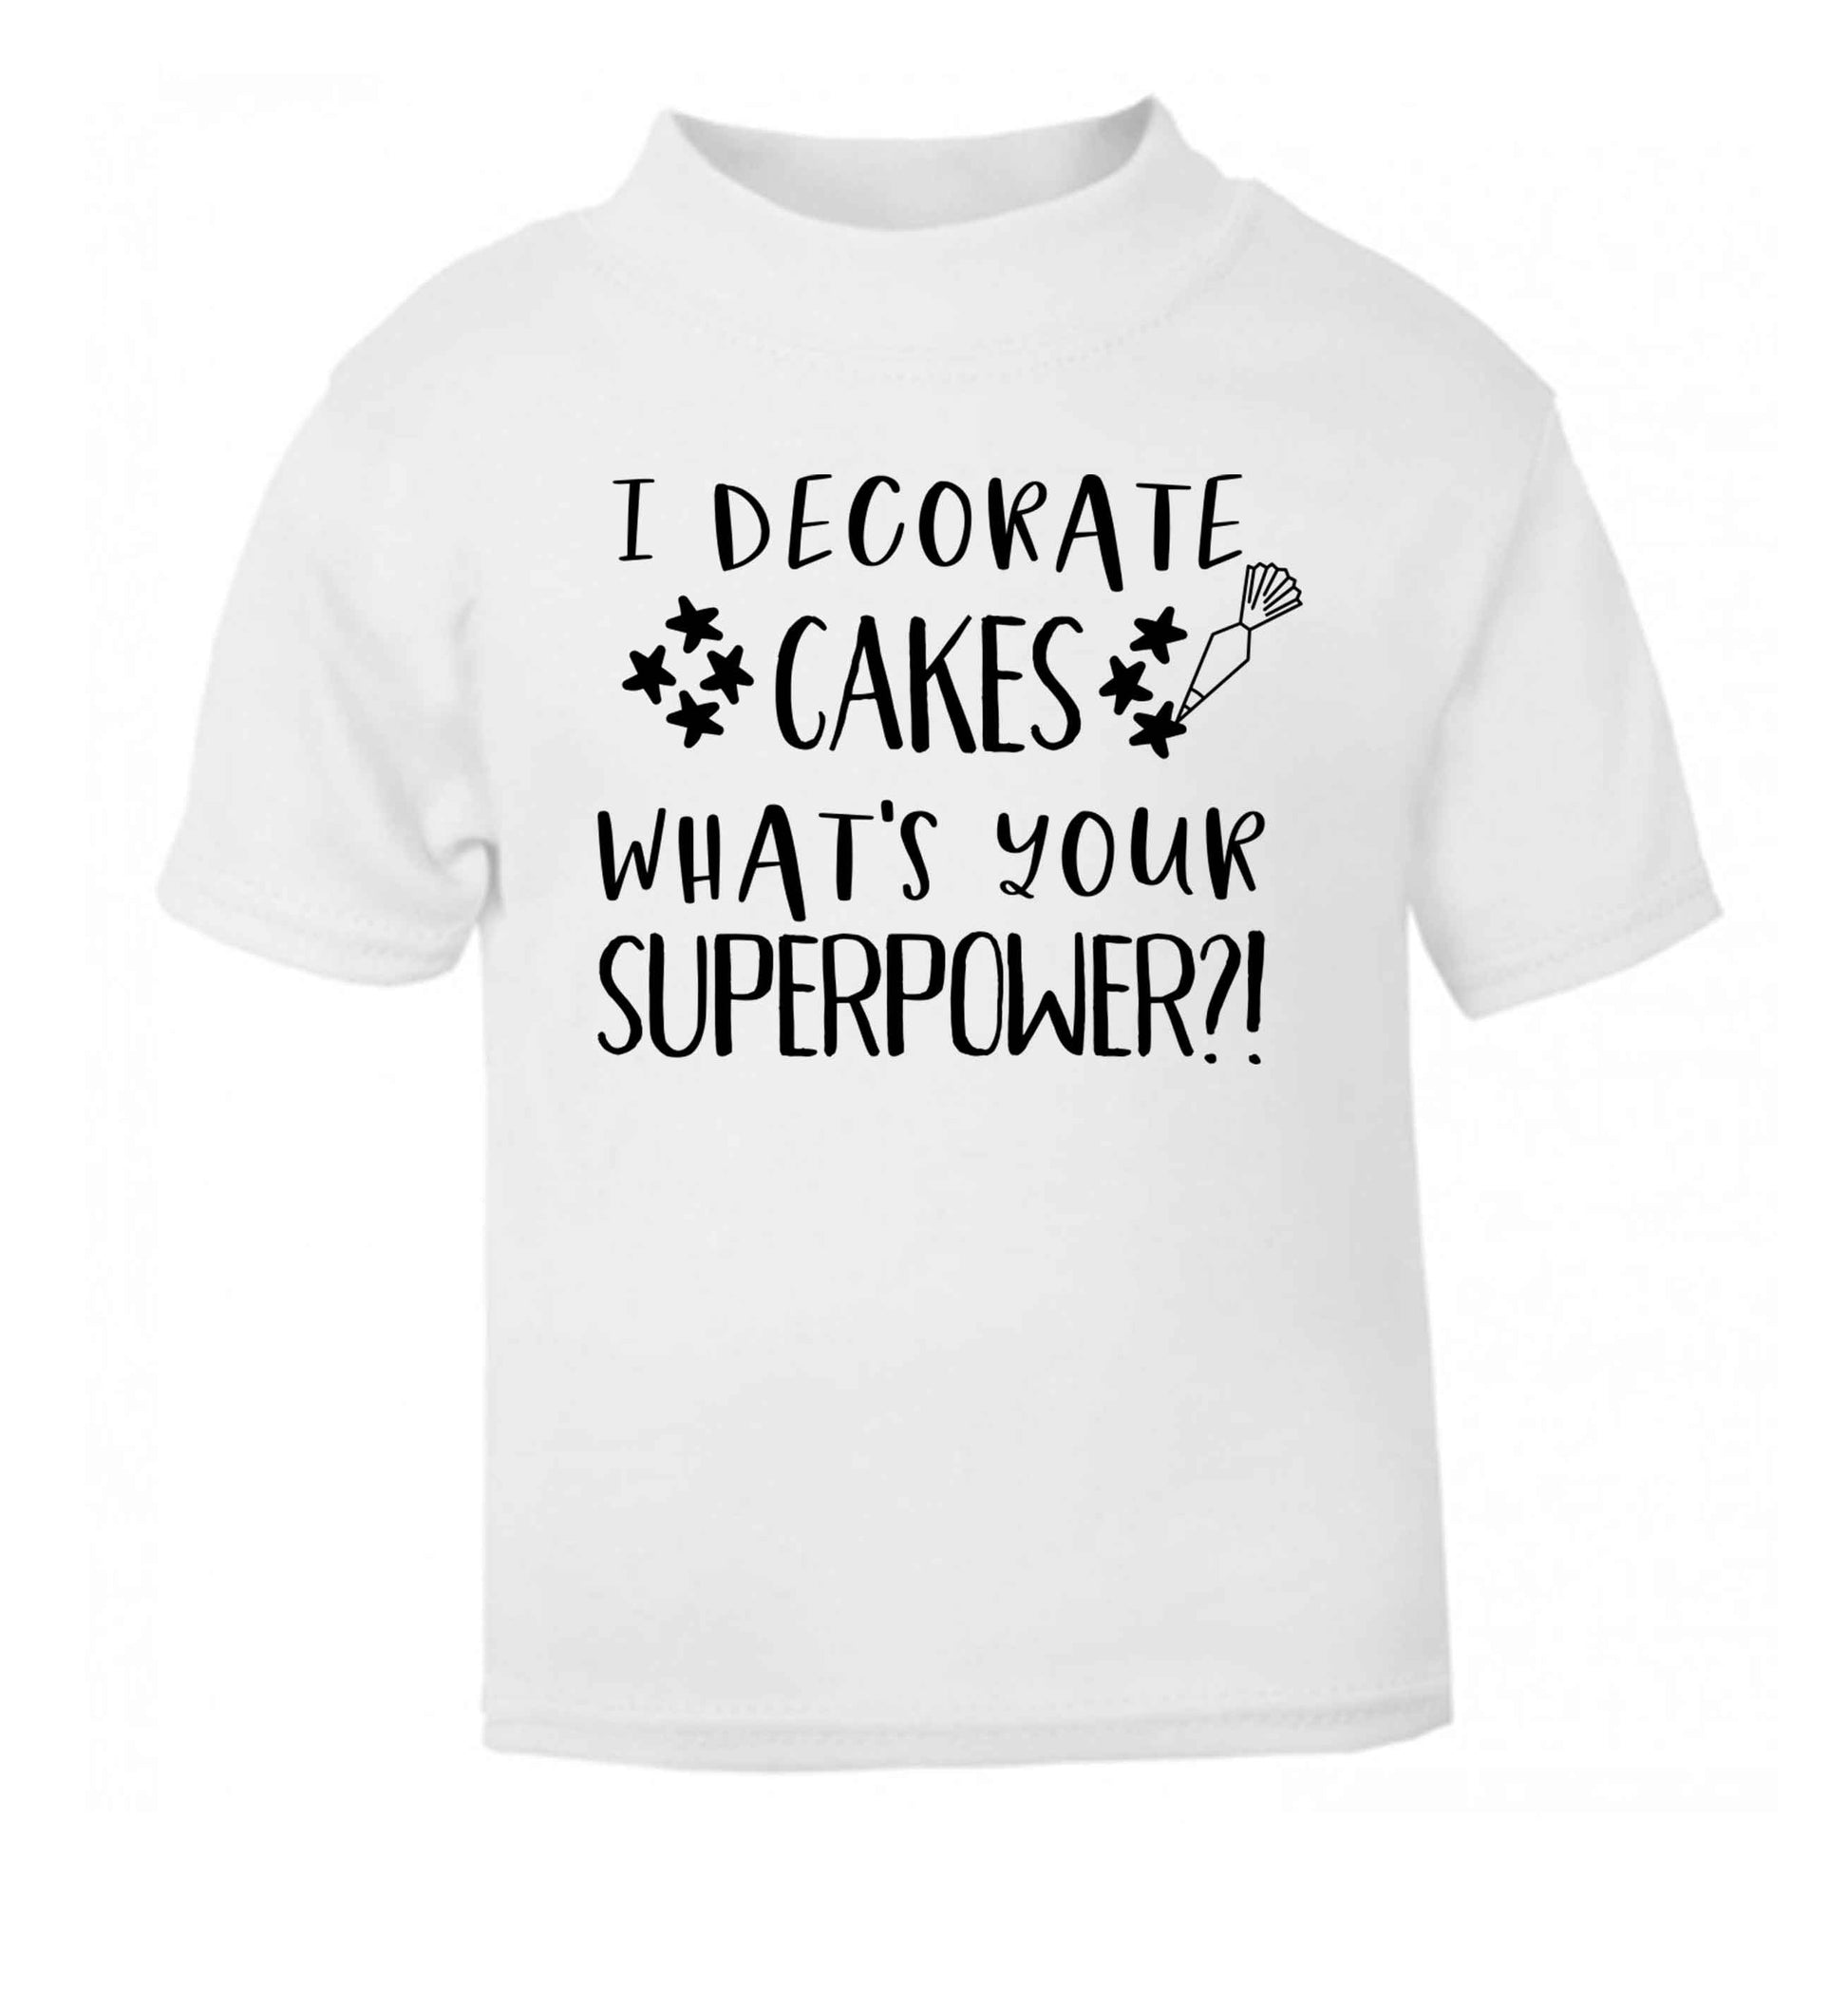 I decorate cakes what's your superpower?! white Baby Toddler Tshirt 2 Years